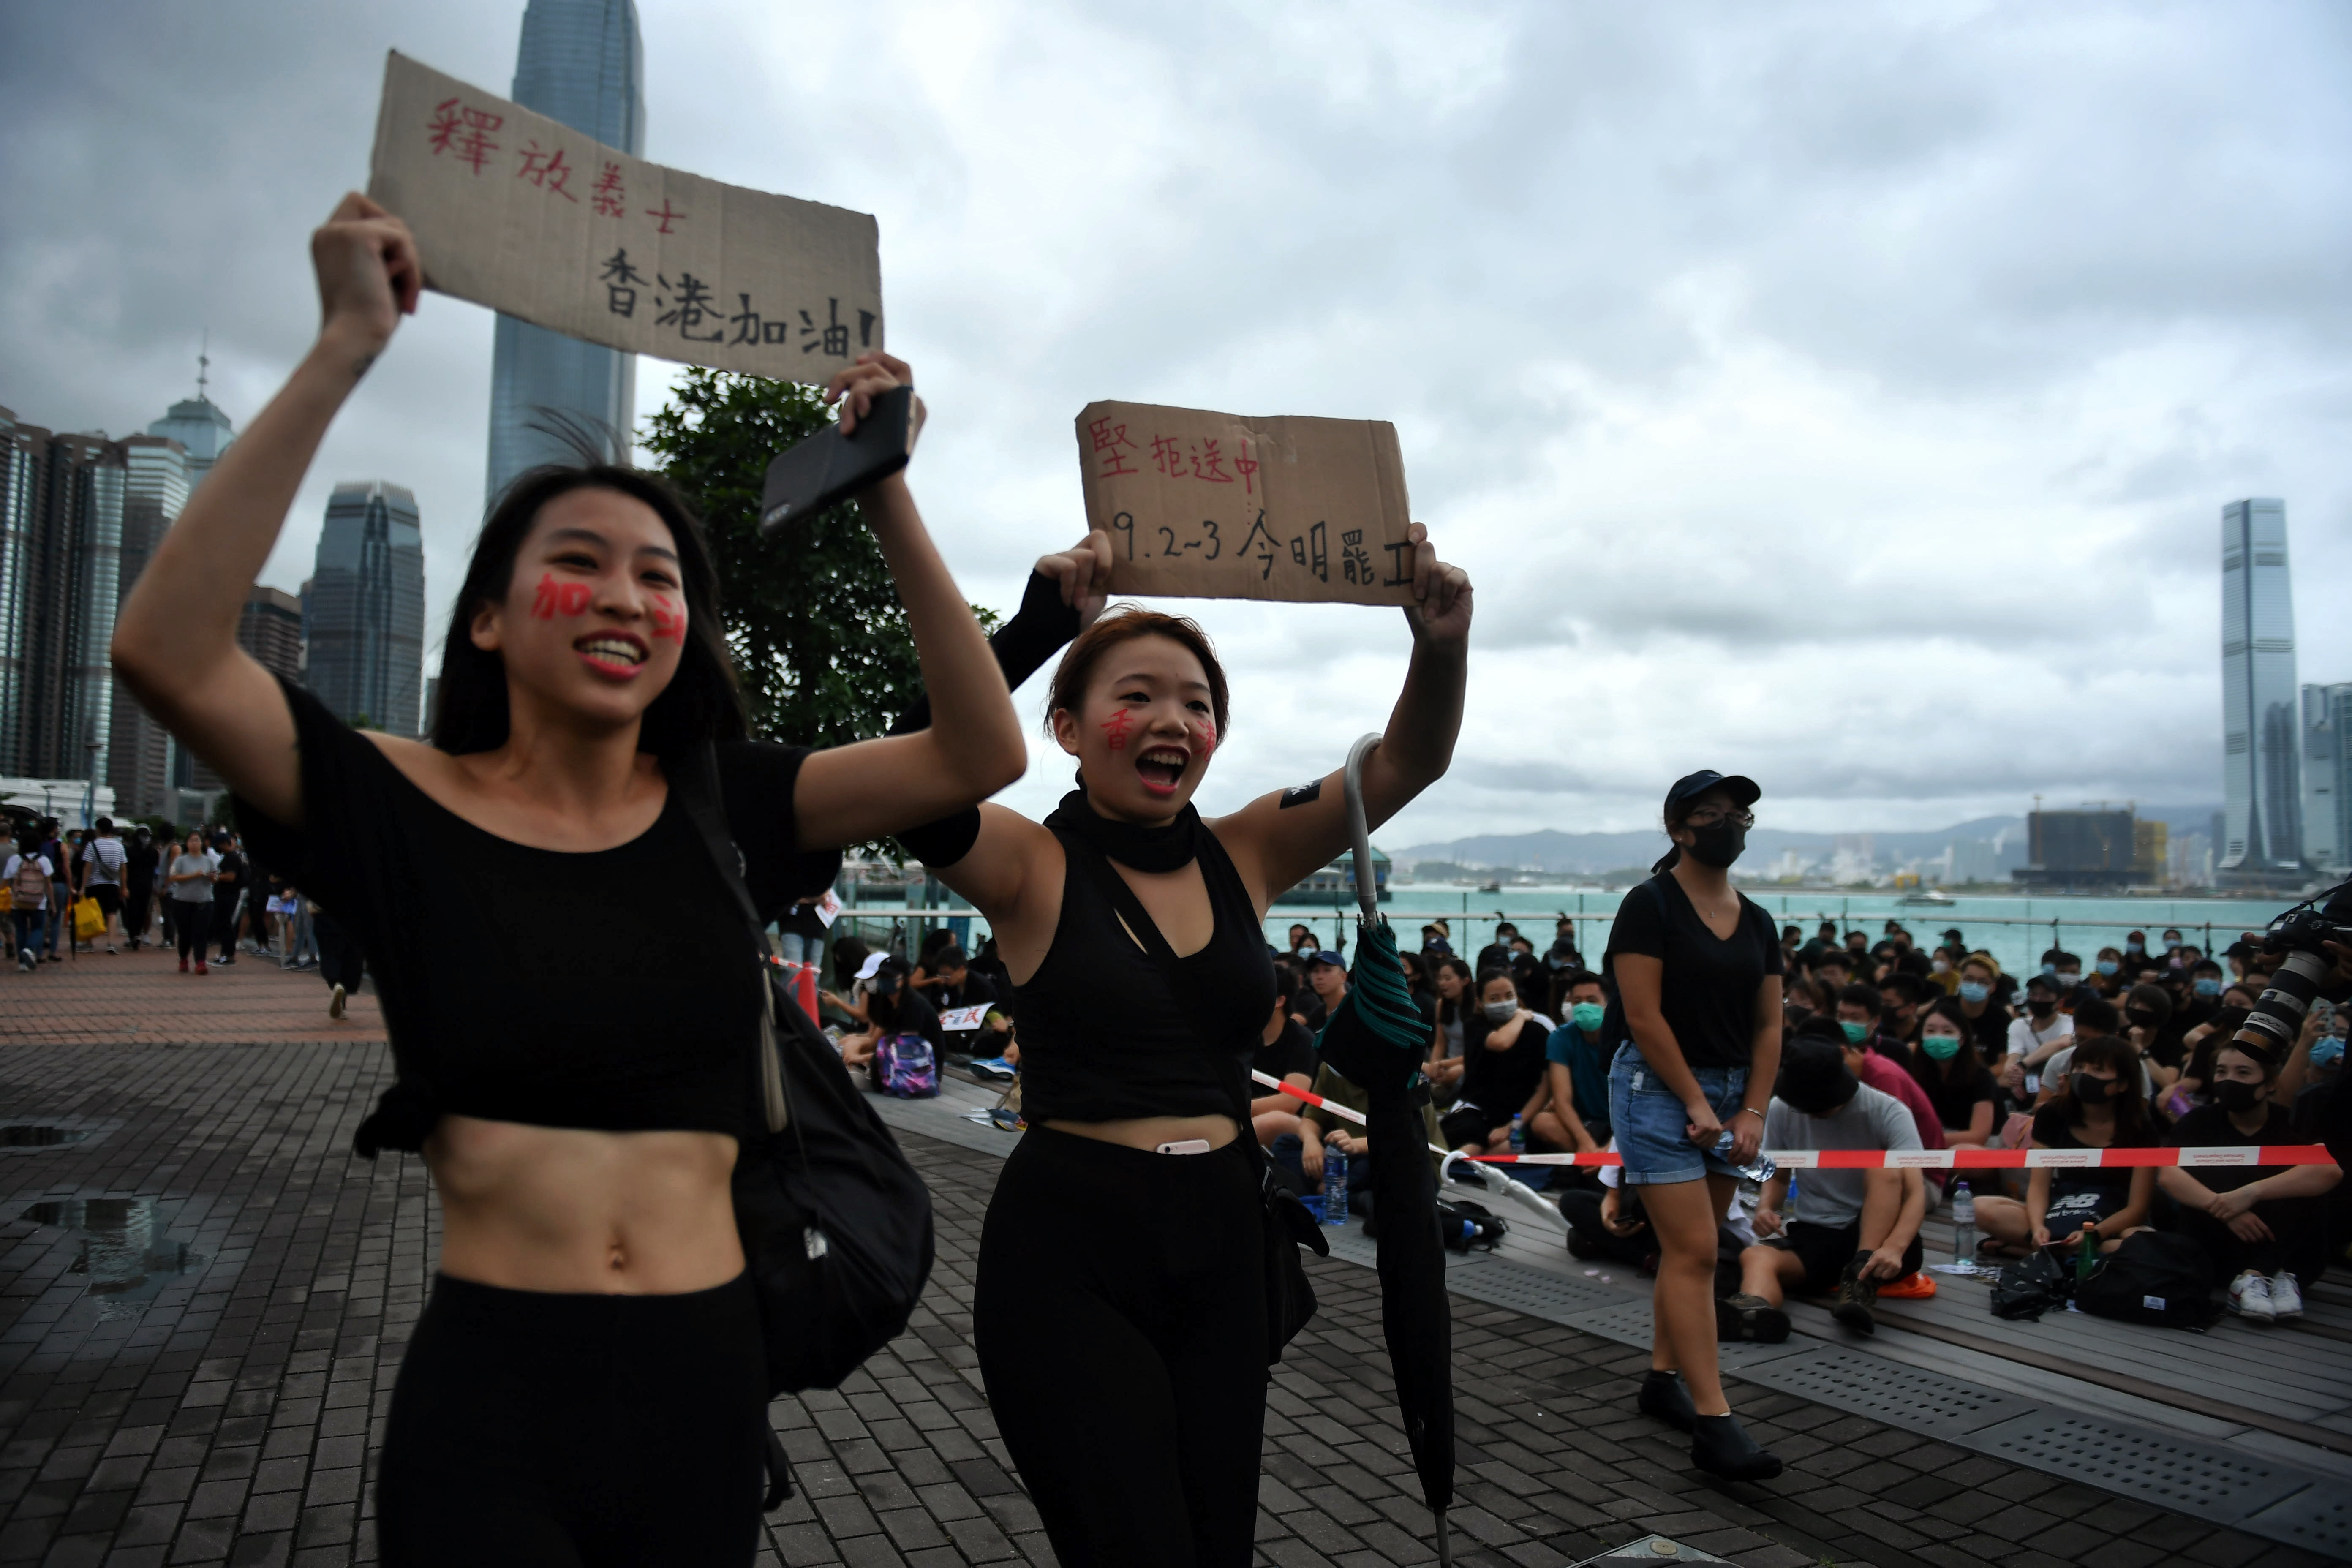 Protesters hold placards during a rally at Tamar Park. Thousands of black-clad students rallied on September 2 at the start of a two-week boycott of university classes, piling pressure on Hong Kong's leaders to resolve months of increasingly violent anti-government protests that show no sign of easing.